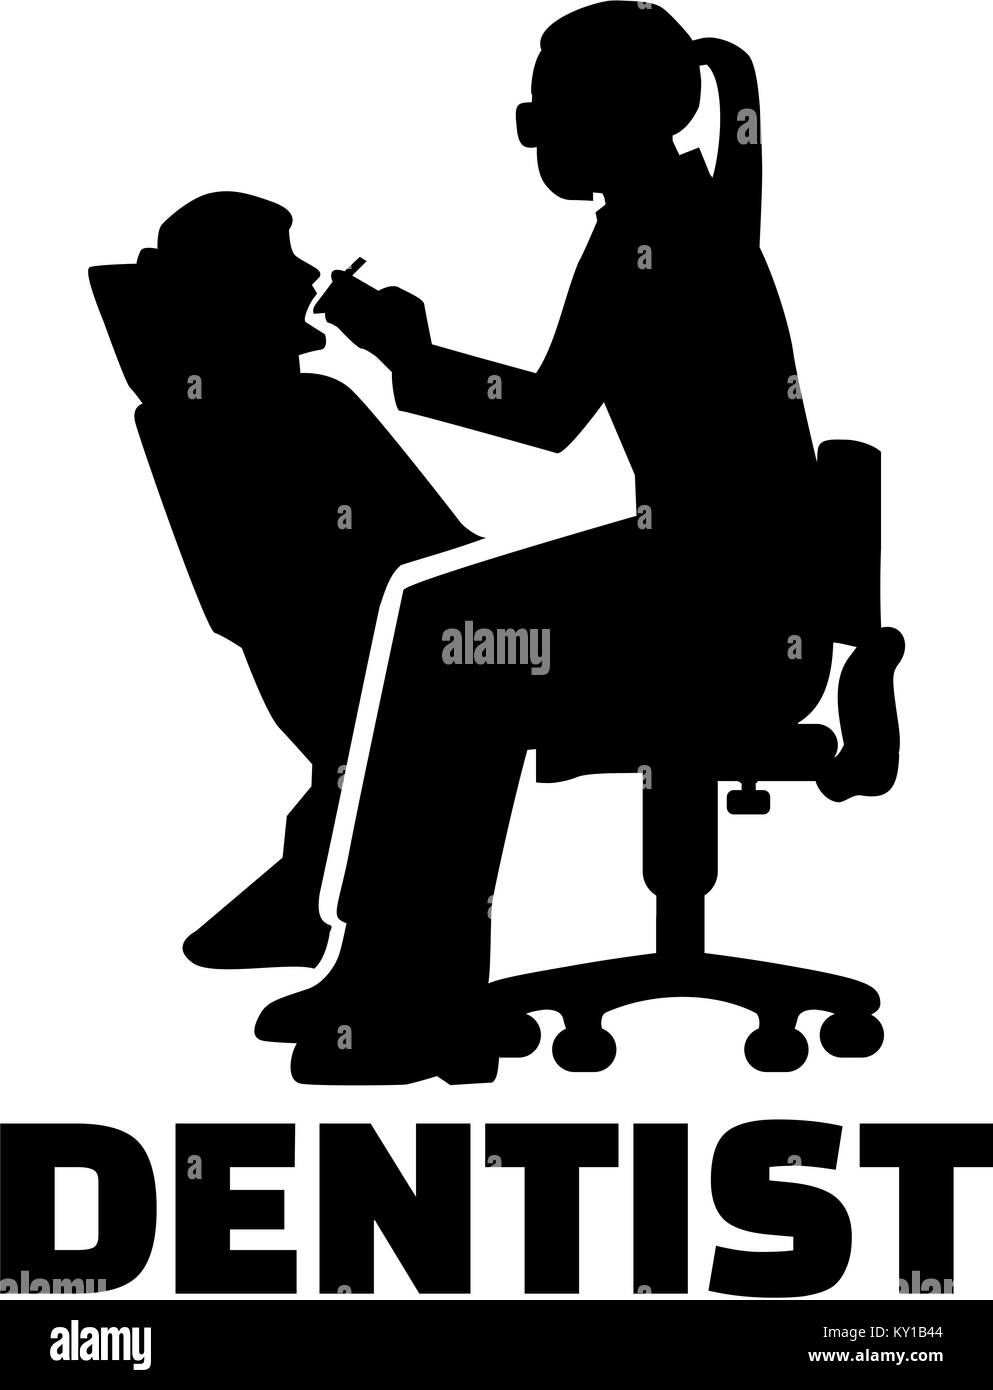 Female dentist silhouette with job title Stock Photo